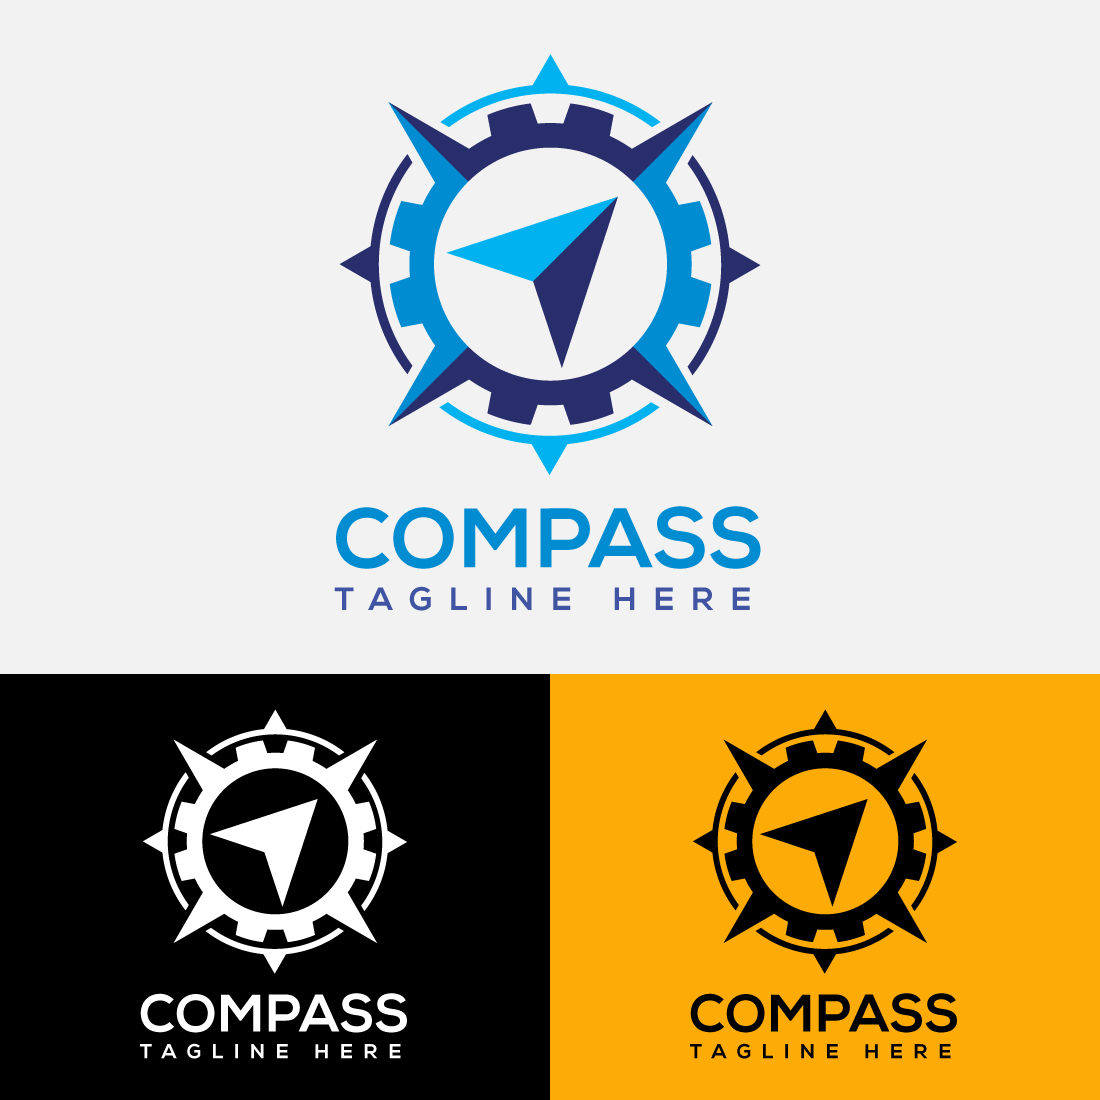 Collection of images of exquisite round logos in the form of a compass.